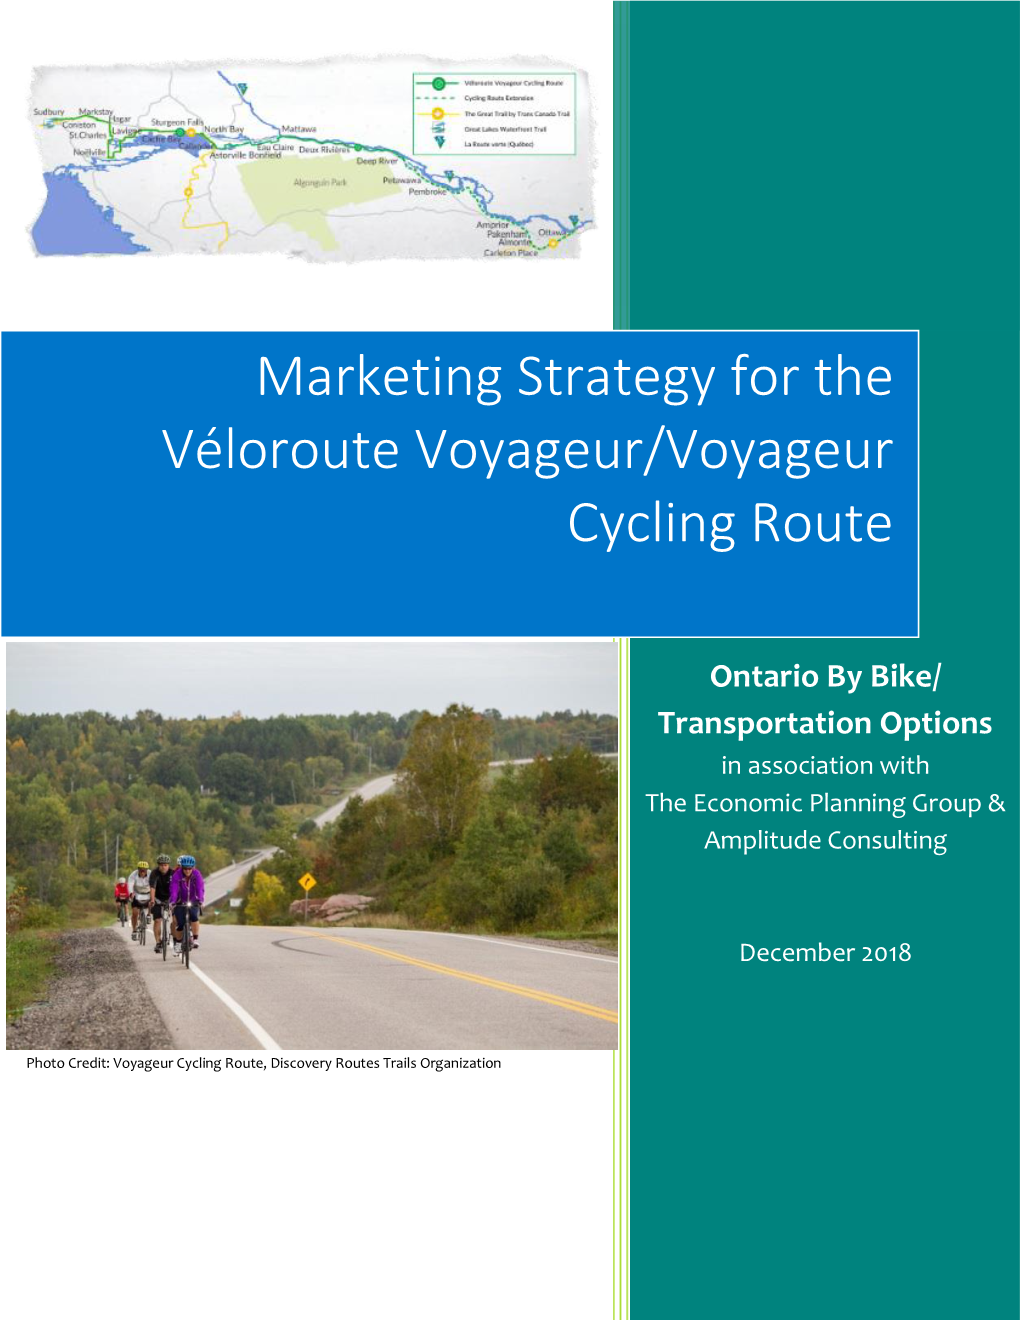 Voyageur Cycling Route Marketing Strategy & Report